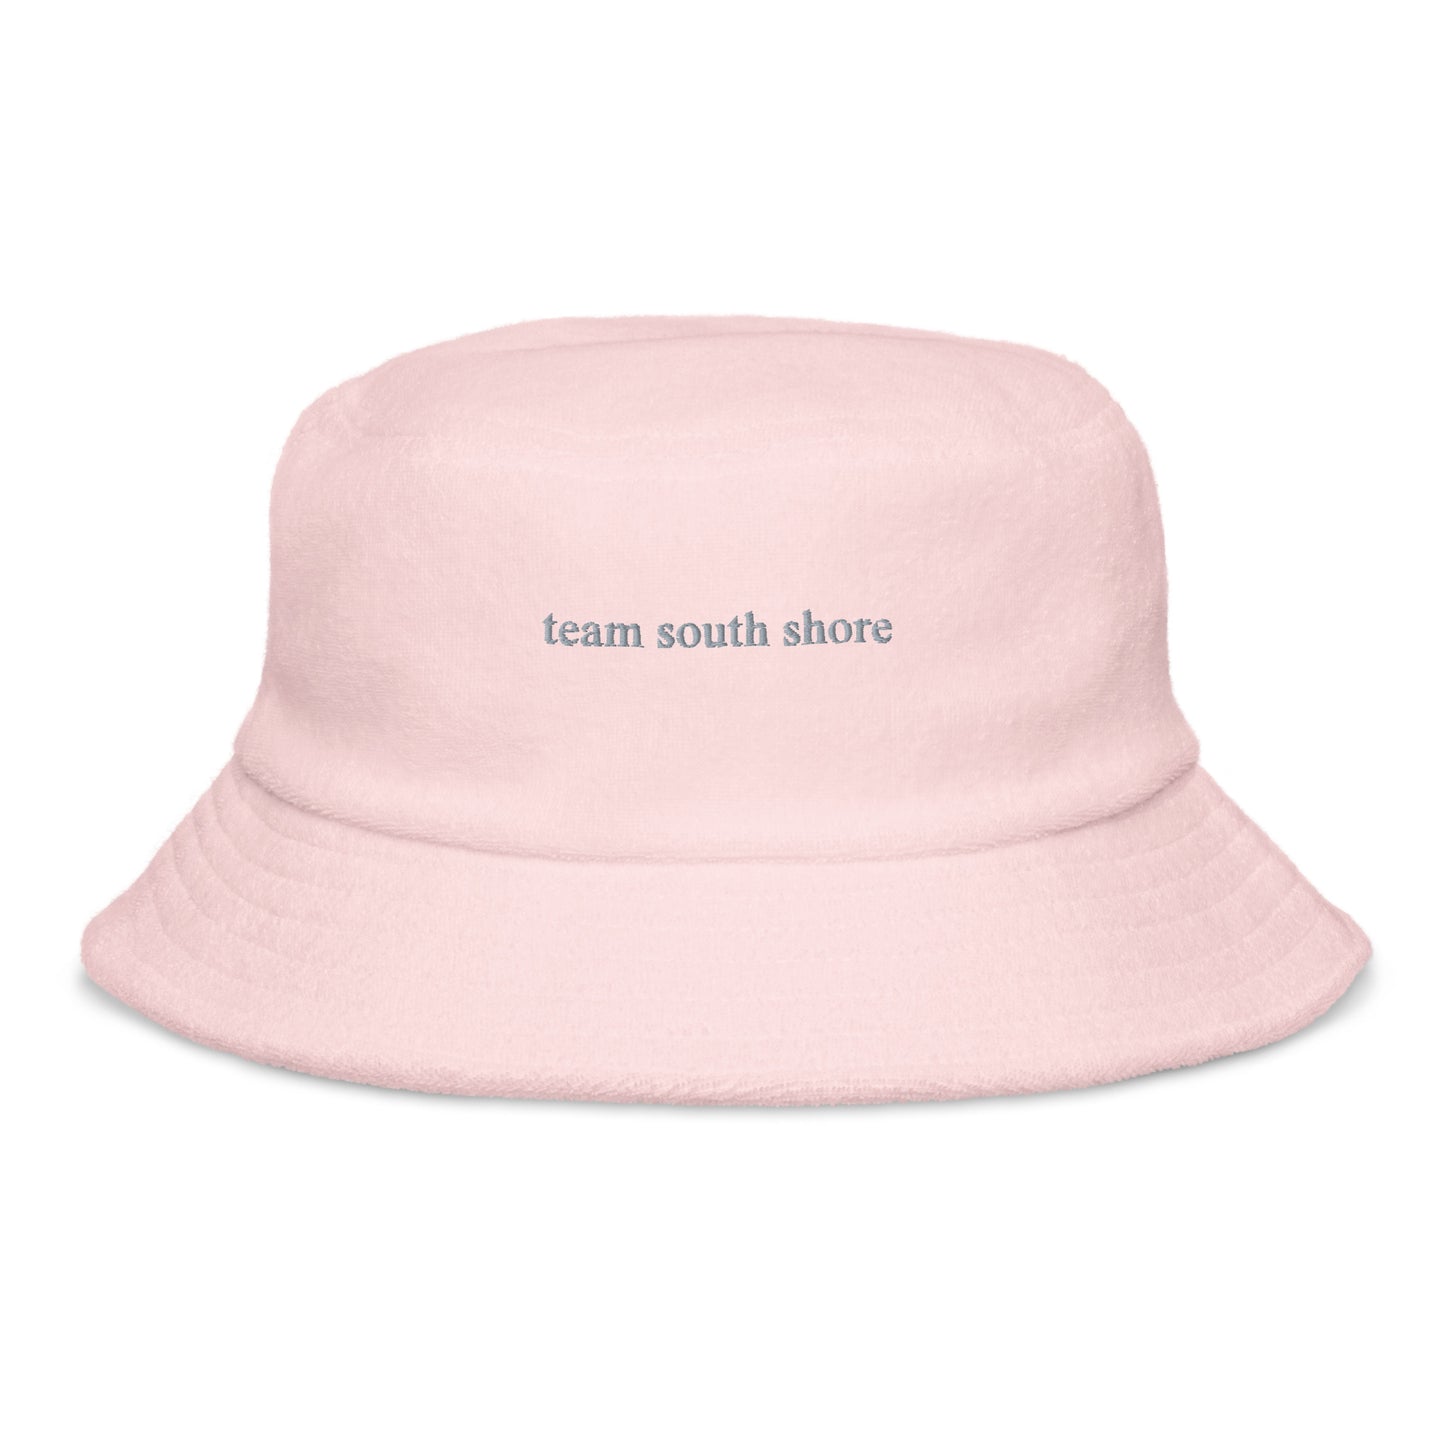 pink bucket hat that says "team south shore" in grey lettering